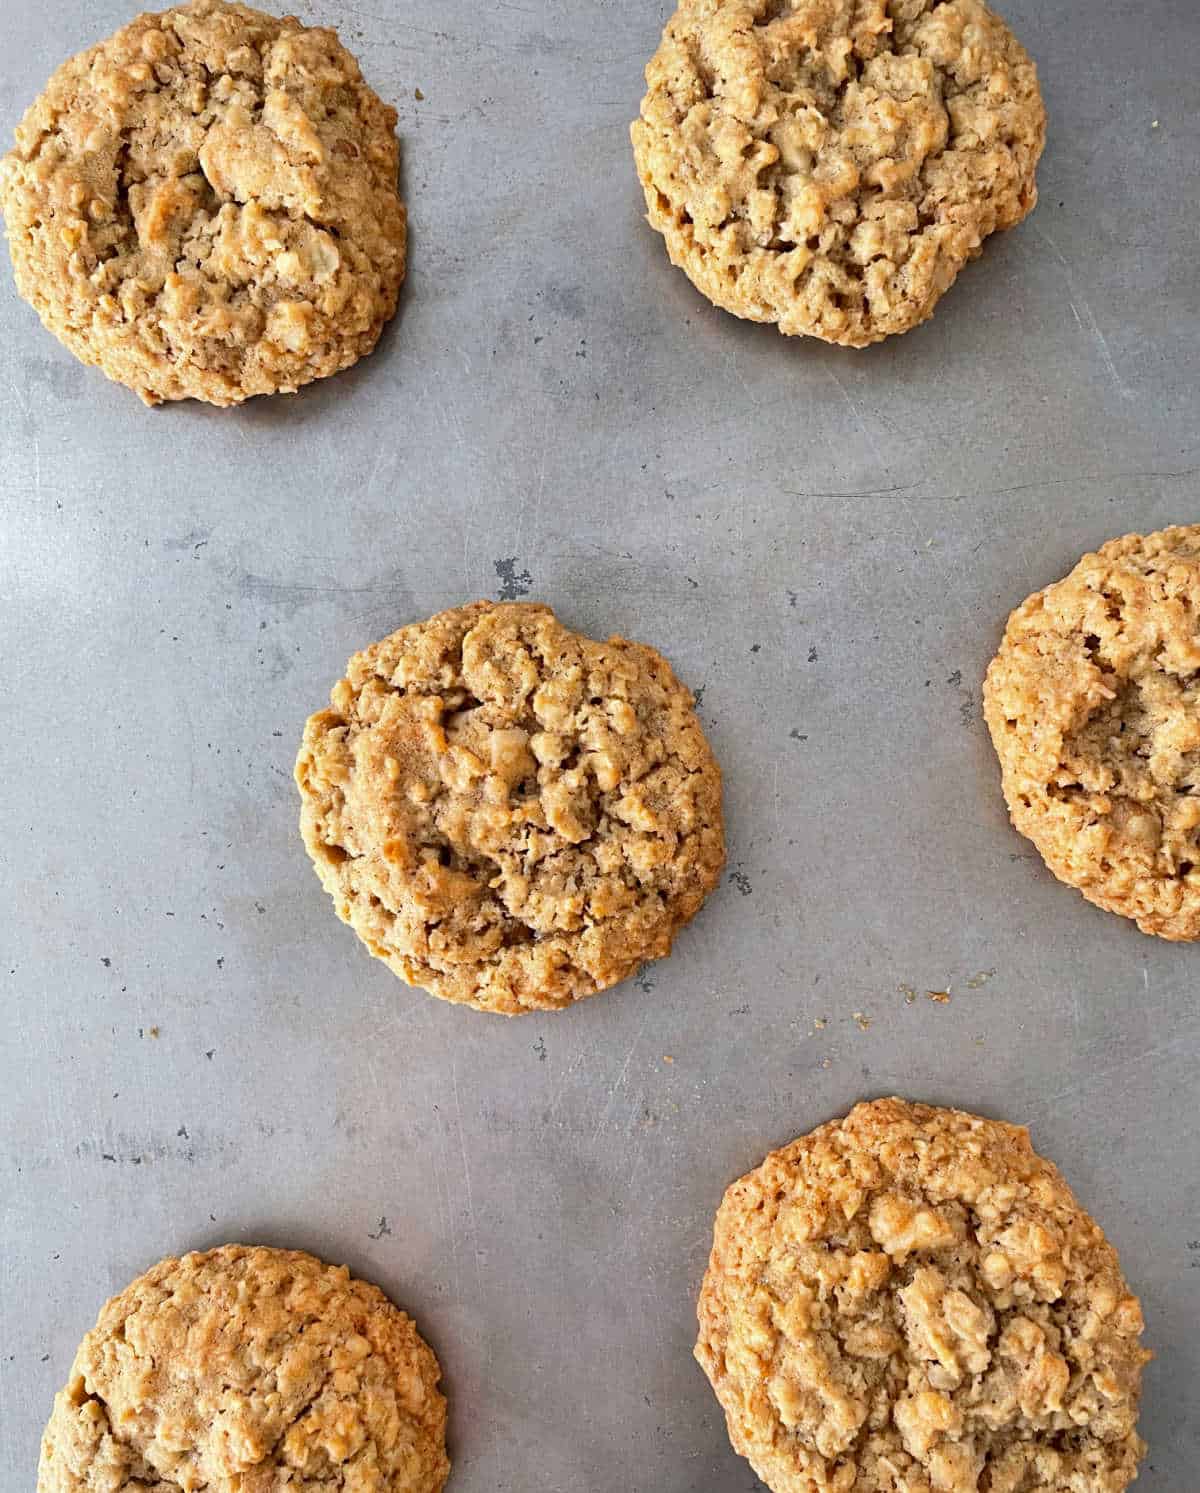 Baked oatmeal cookies on metal sheet pan, close up view from top.